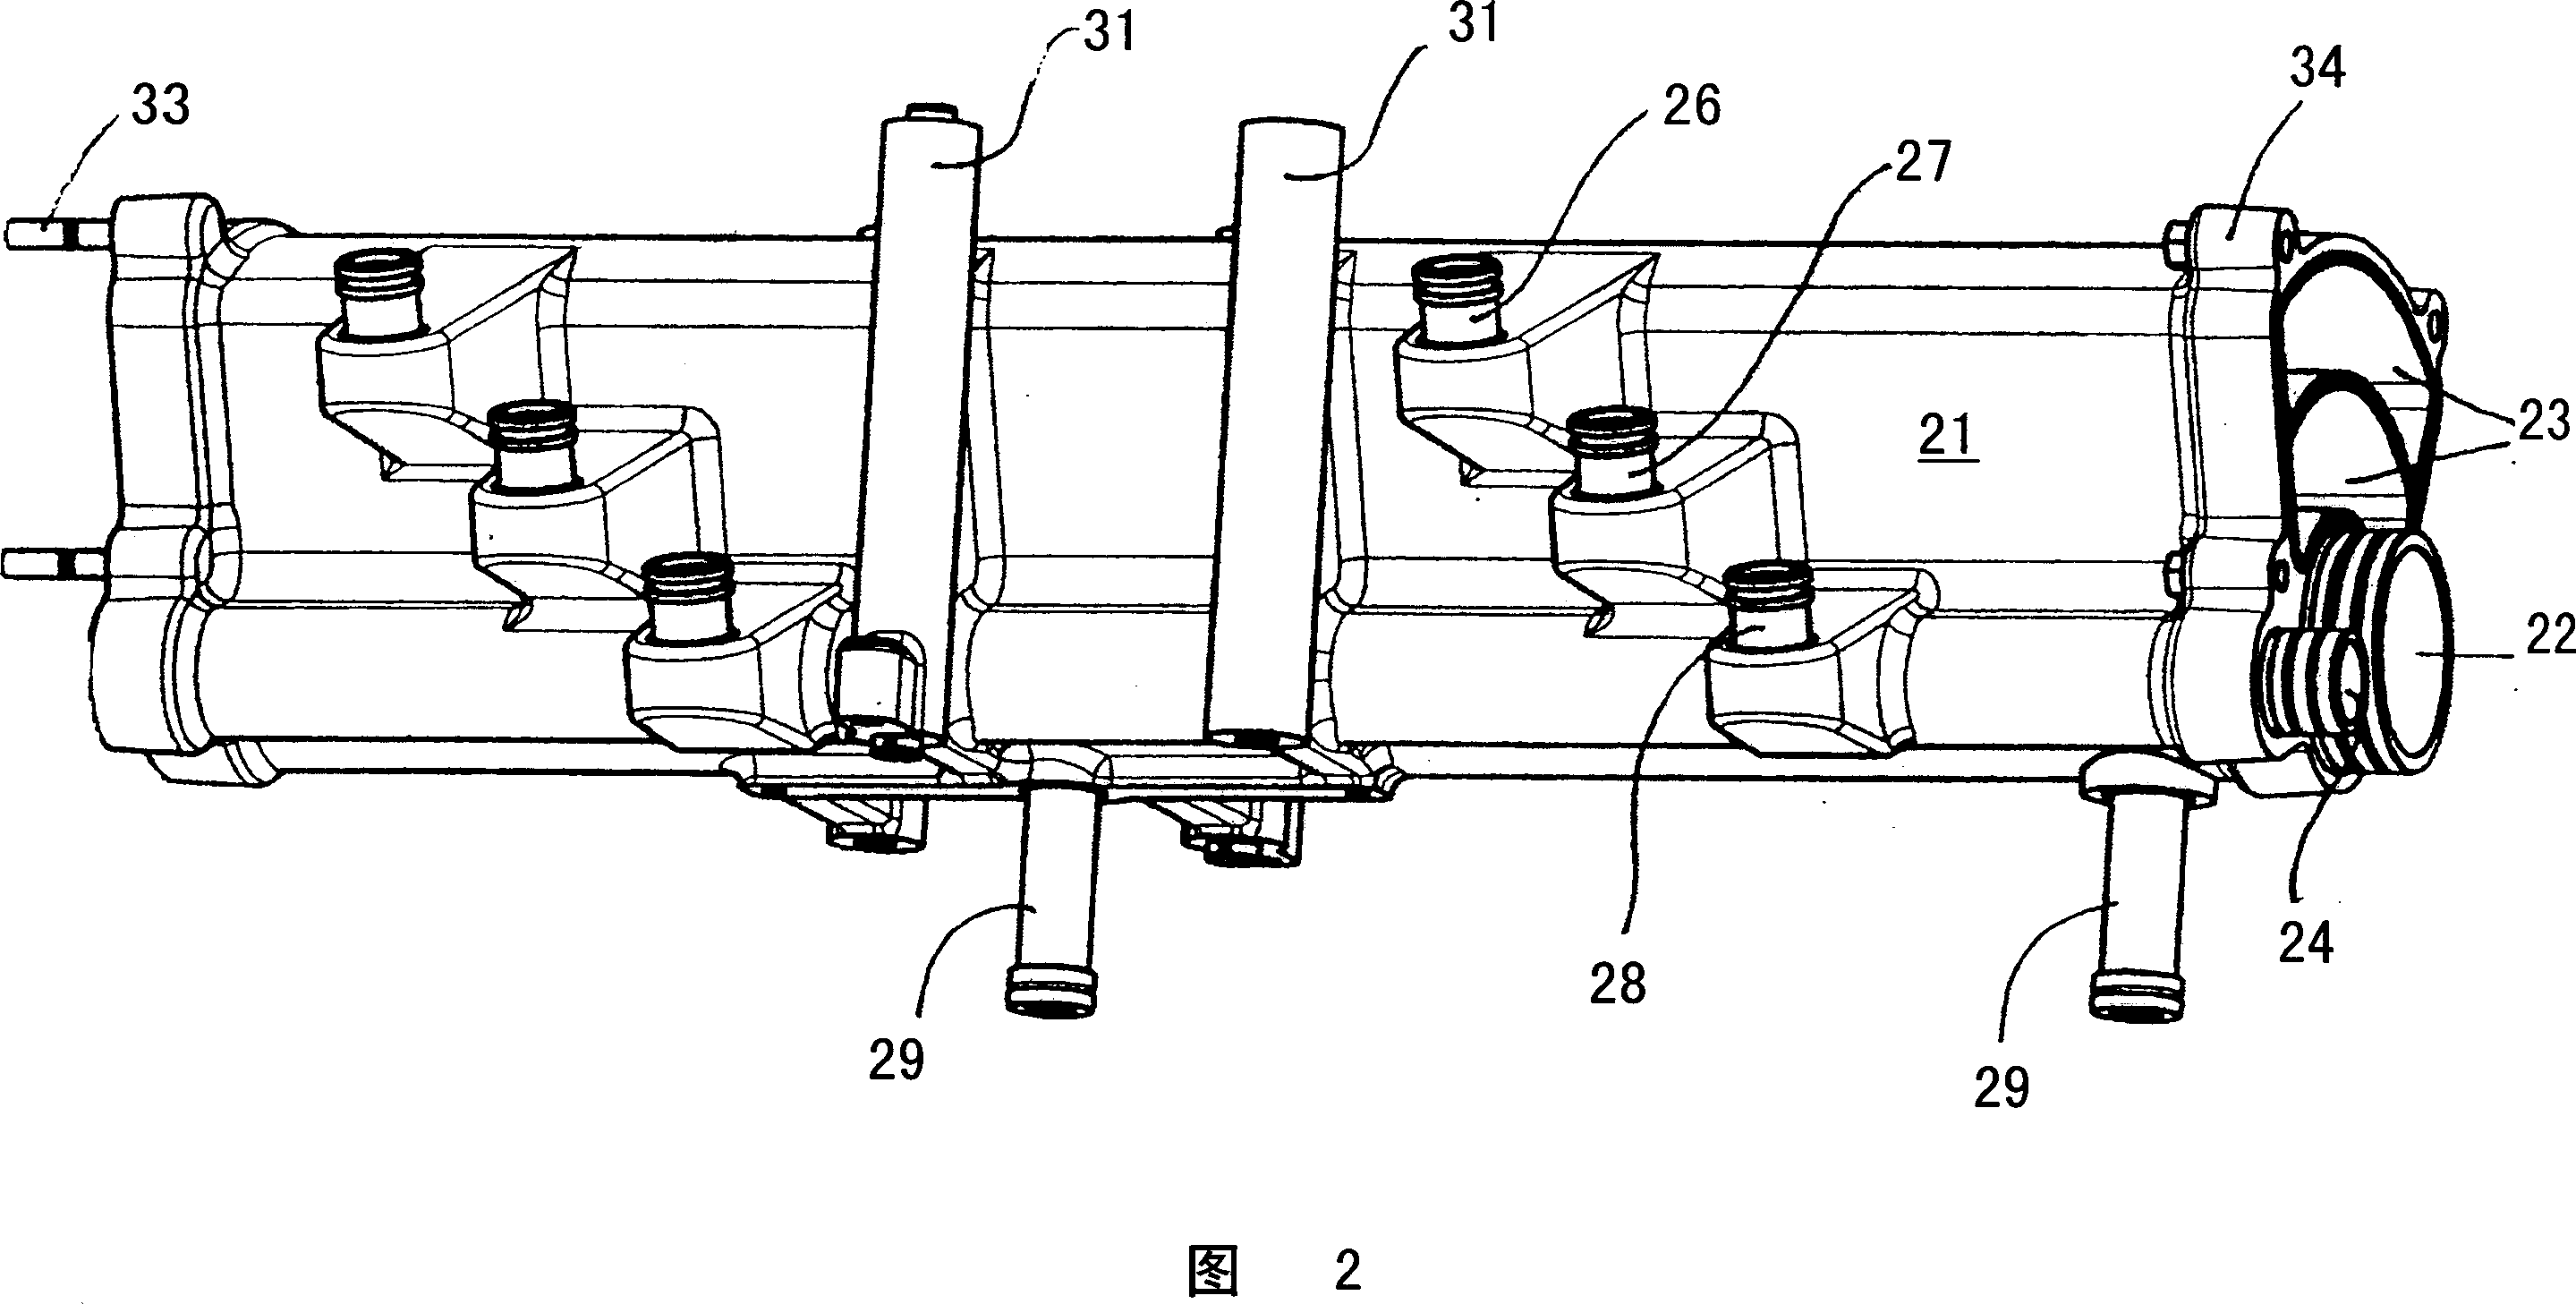 Internal combustion engine with a lubricating, cooling and starting system